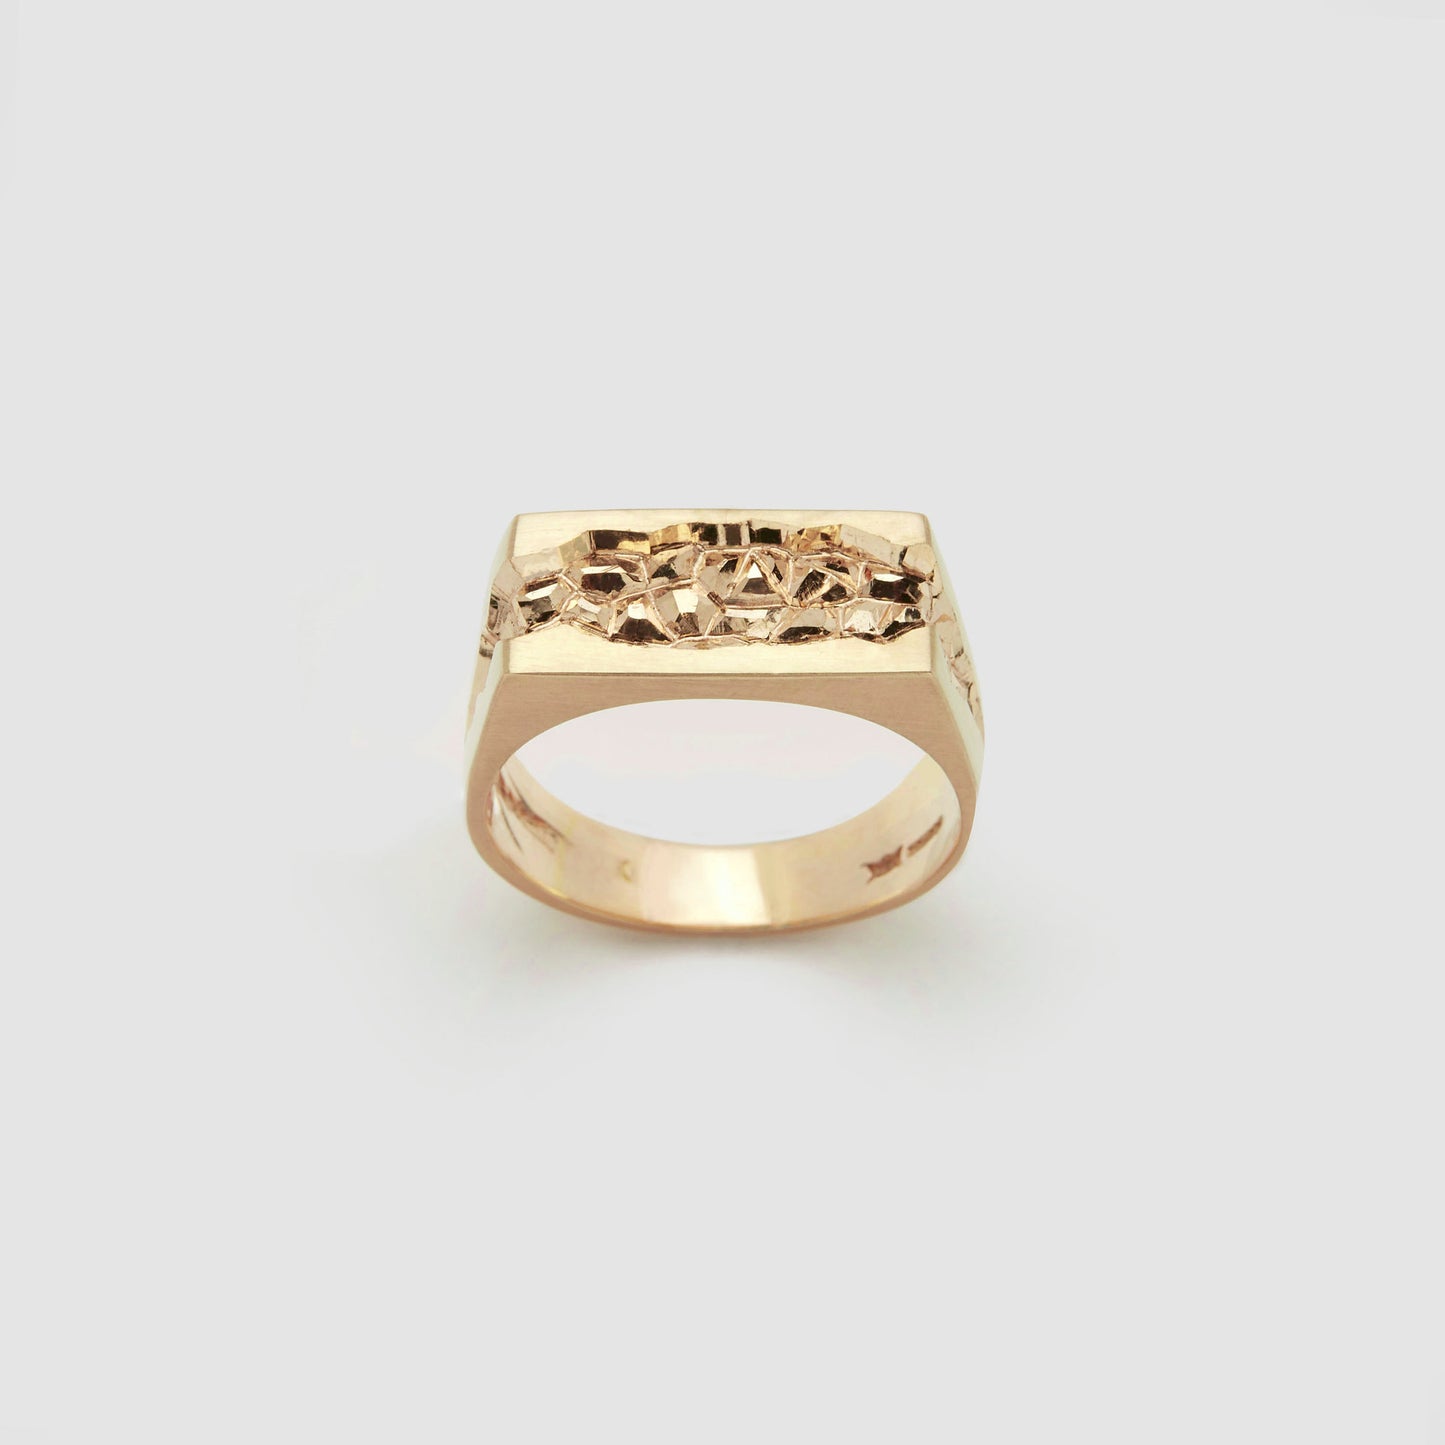 Castro Smith Jewelry Gold Japanese Chisel Hellsgate Ring.